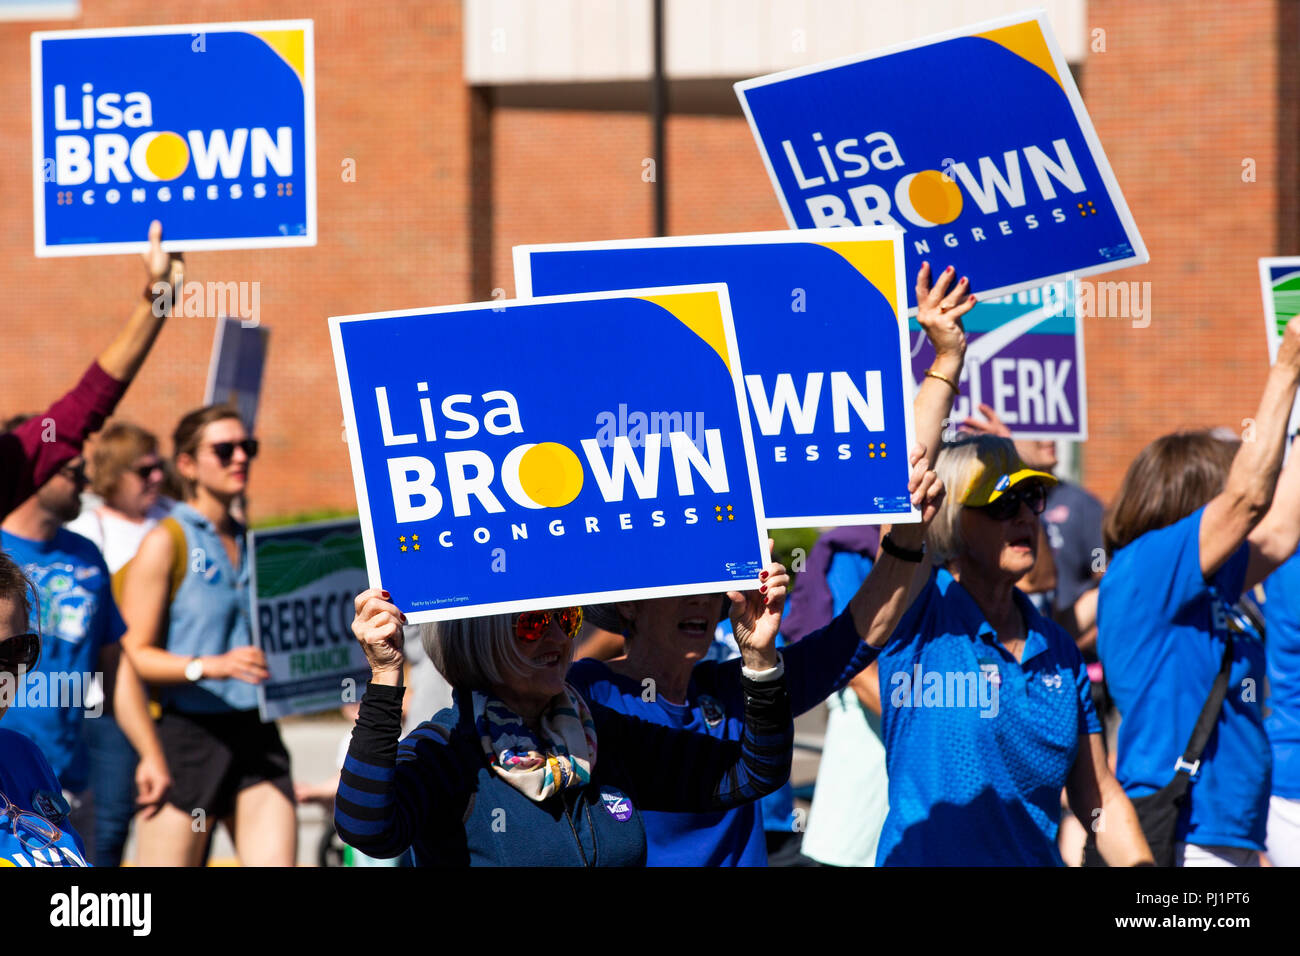 Supporters of Lisa Brown, a Democratic candidate running to represent Washington's 5th Congressional District, carry signs while marching in the annua Stock Photo